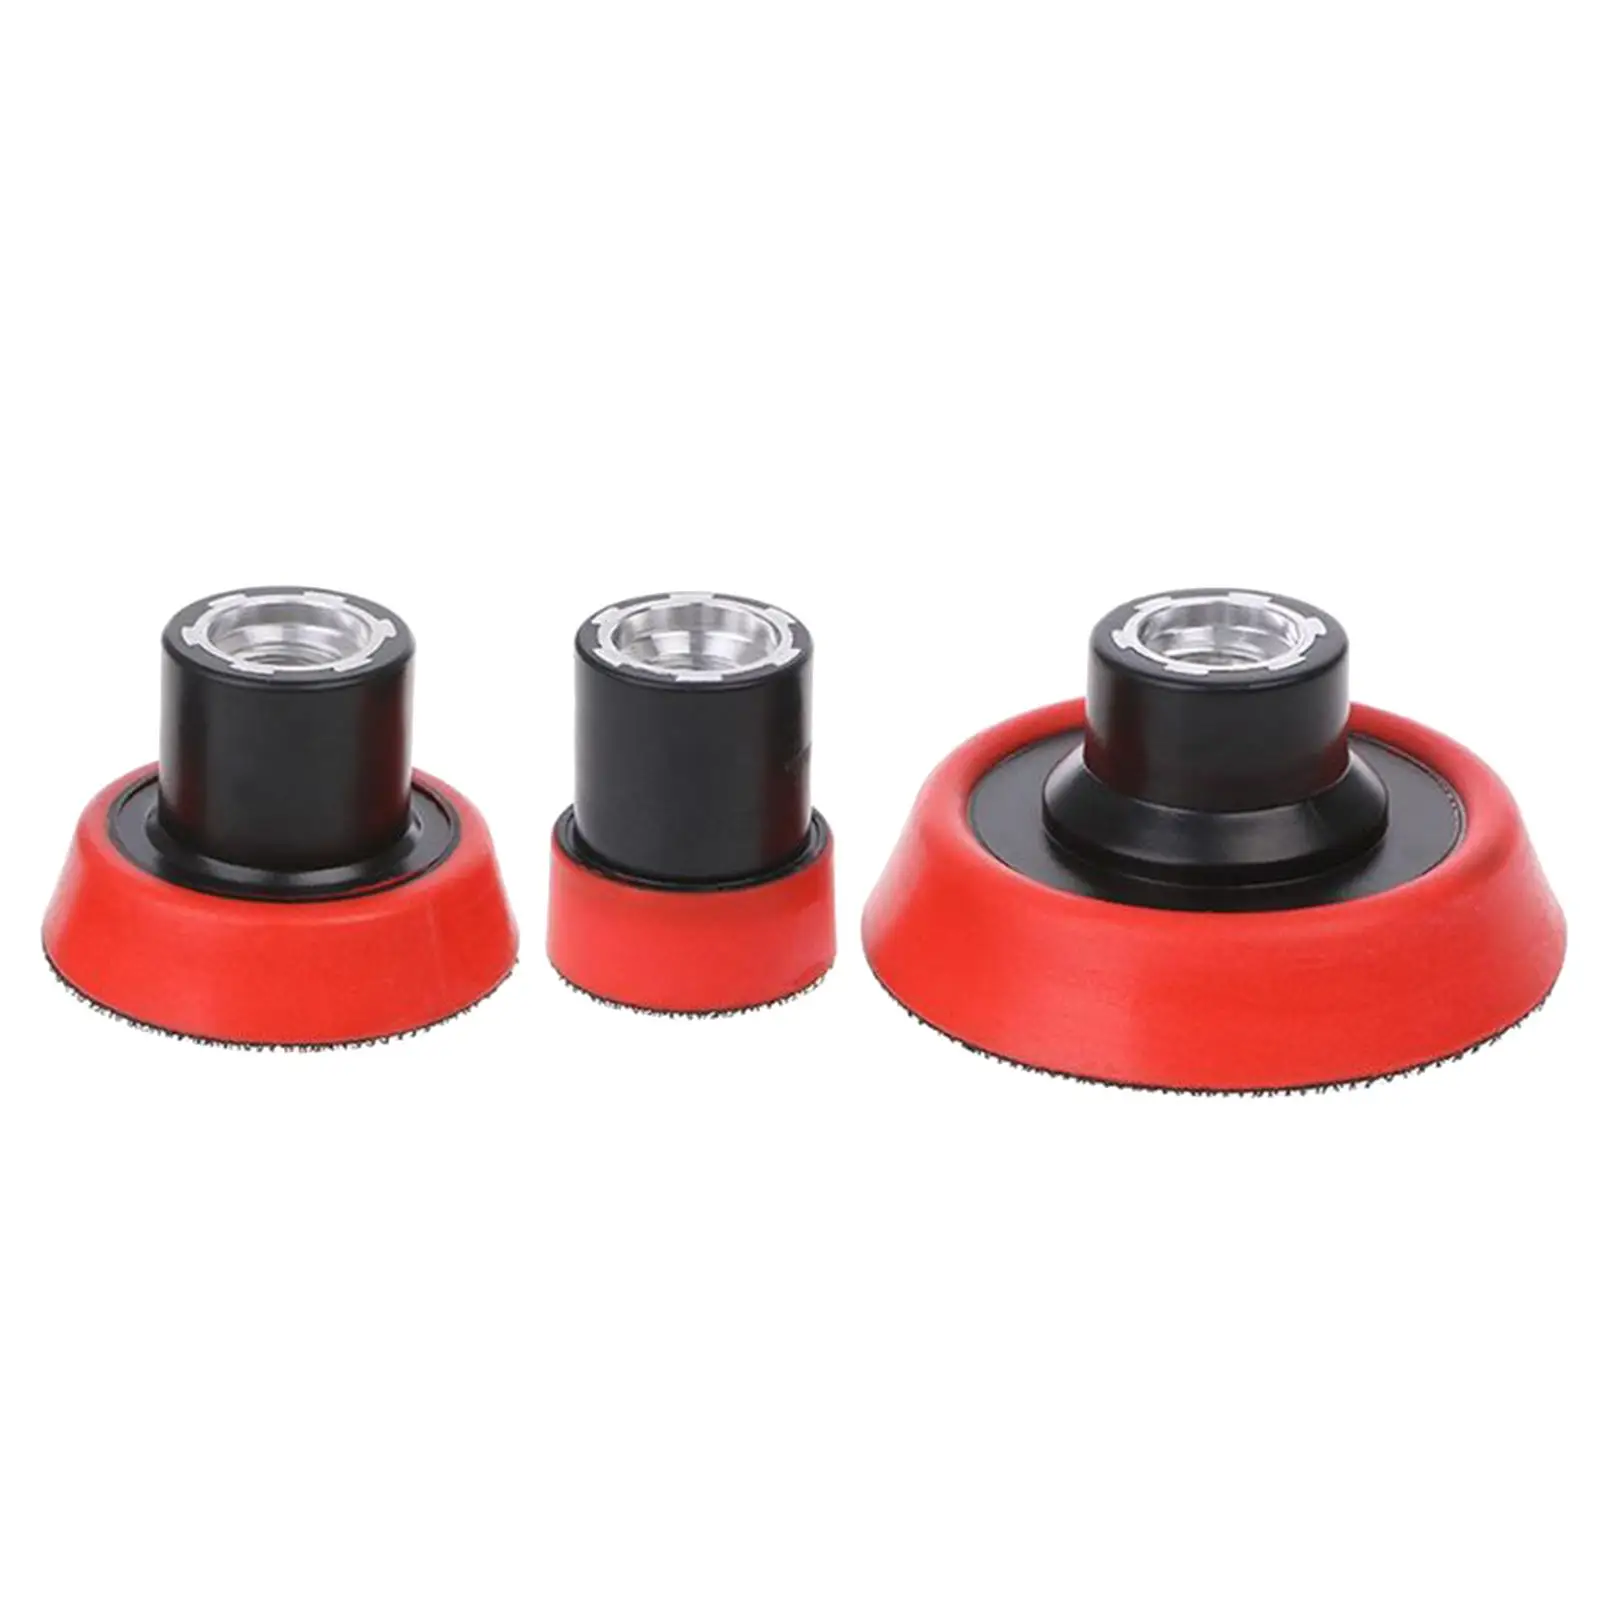 3x Polisher Durable Accessories Buffering Set Backing   M14 for Car Wash